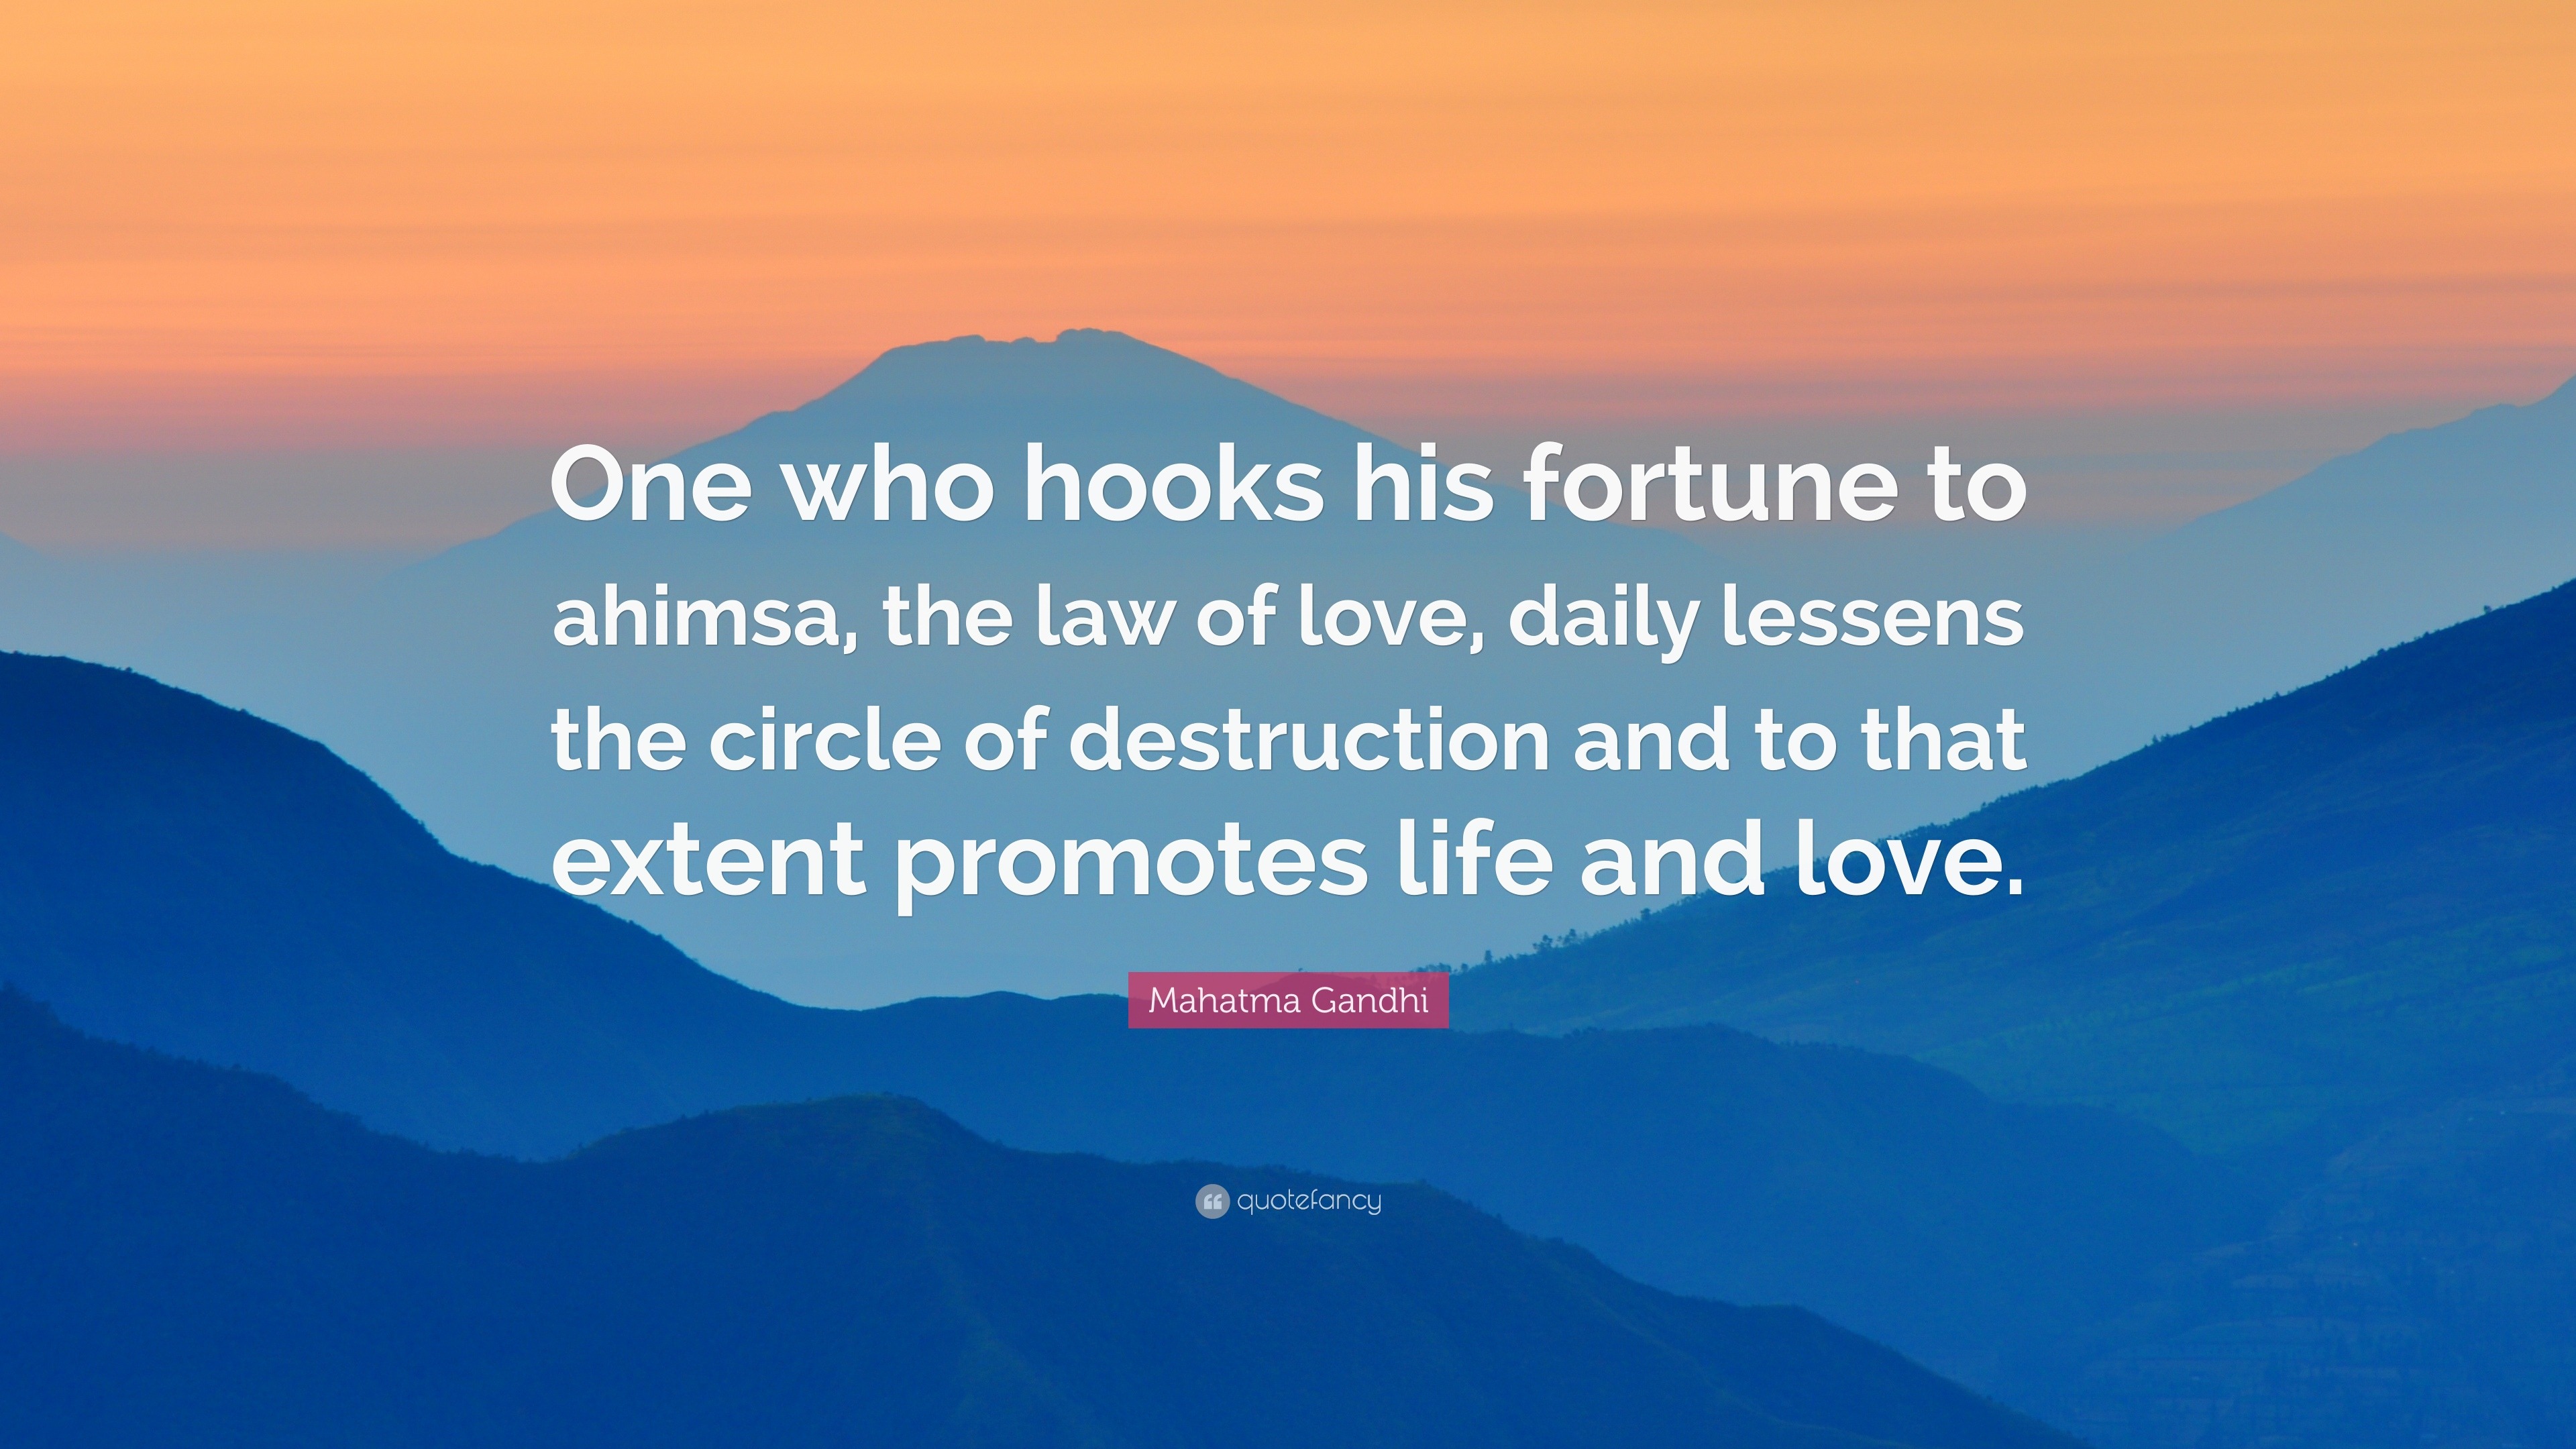 Mahatma Gandhi Quote “ e who hooks his fortune to ahimsa the law of